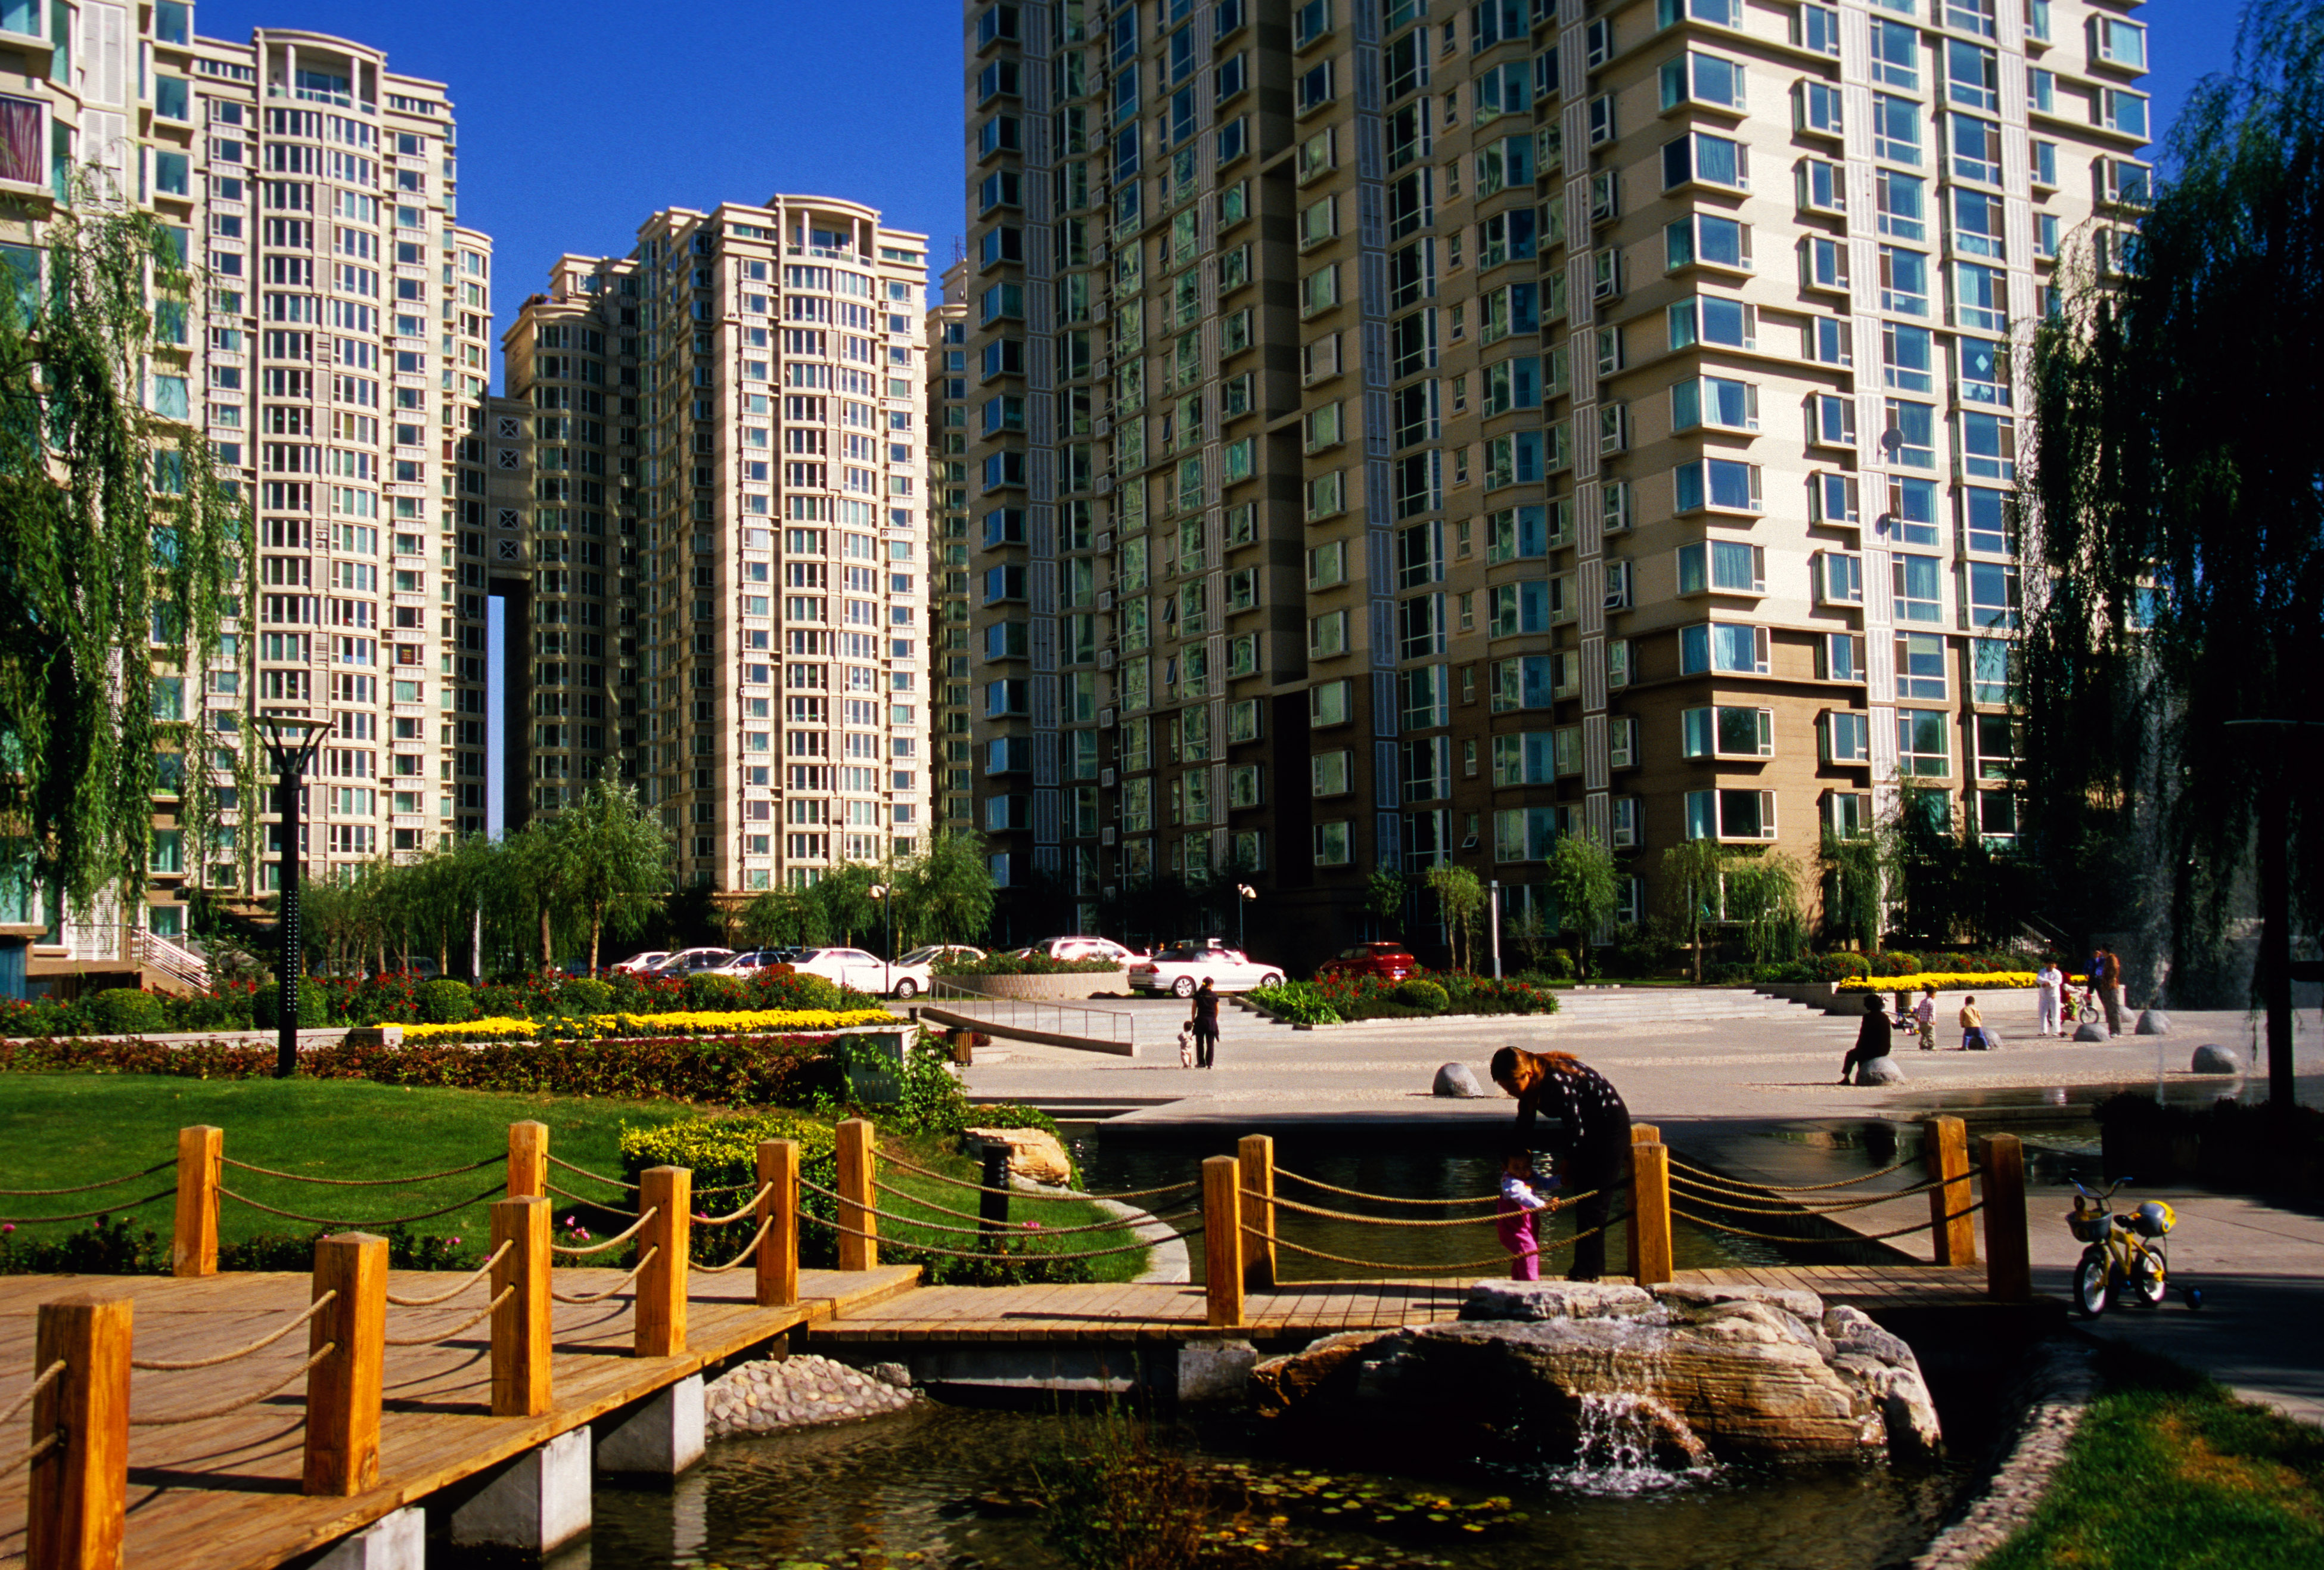 Gated apartment community in the eastern suburb of Tongzhou, in Beijing (Universal Images Group/UIG/Getty Images)